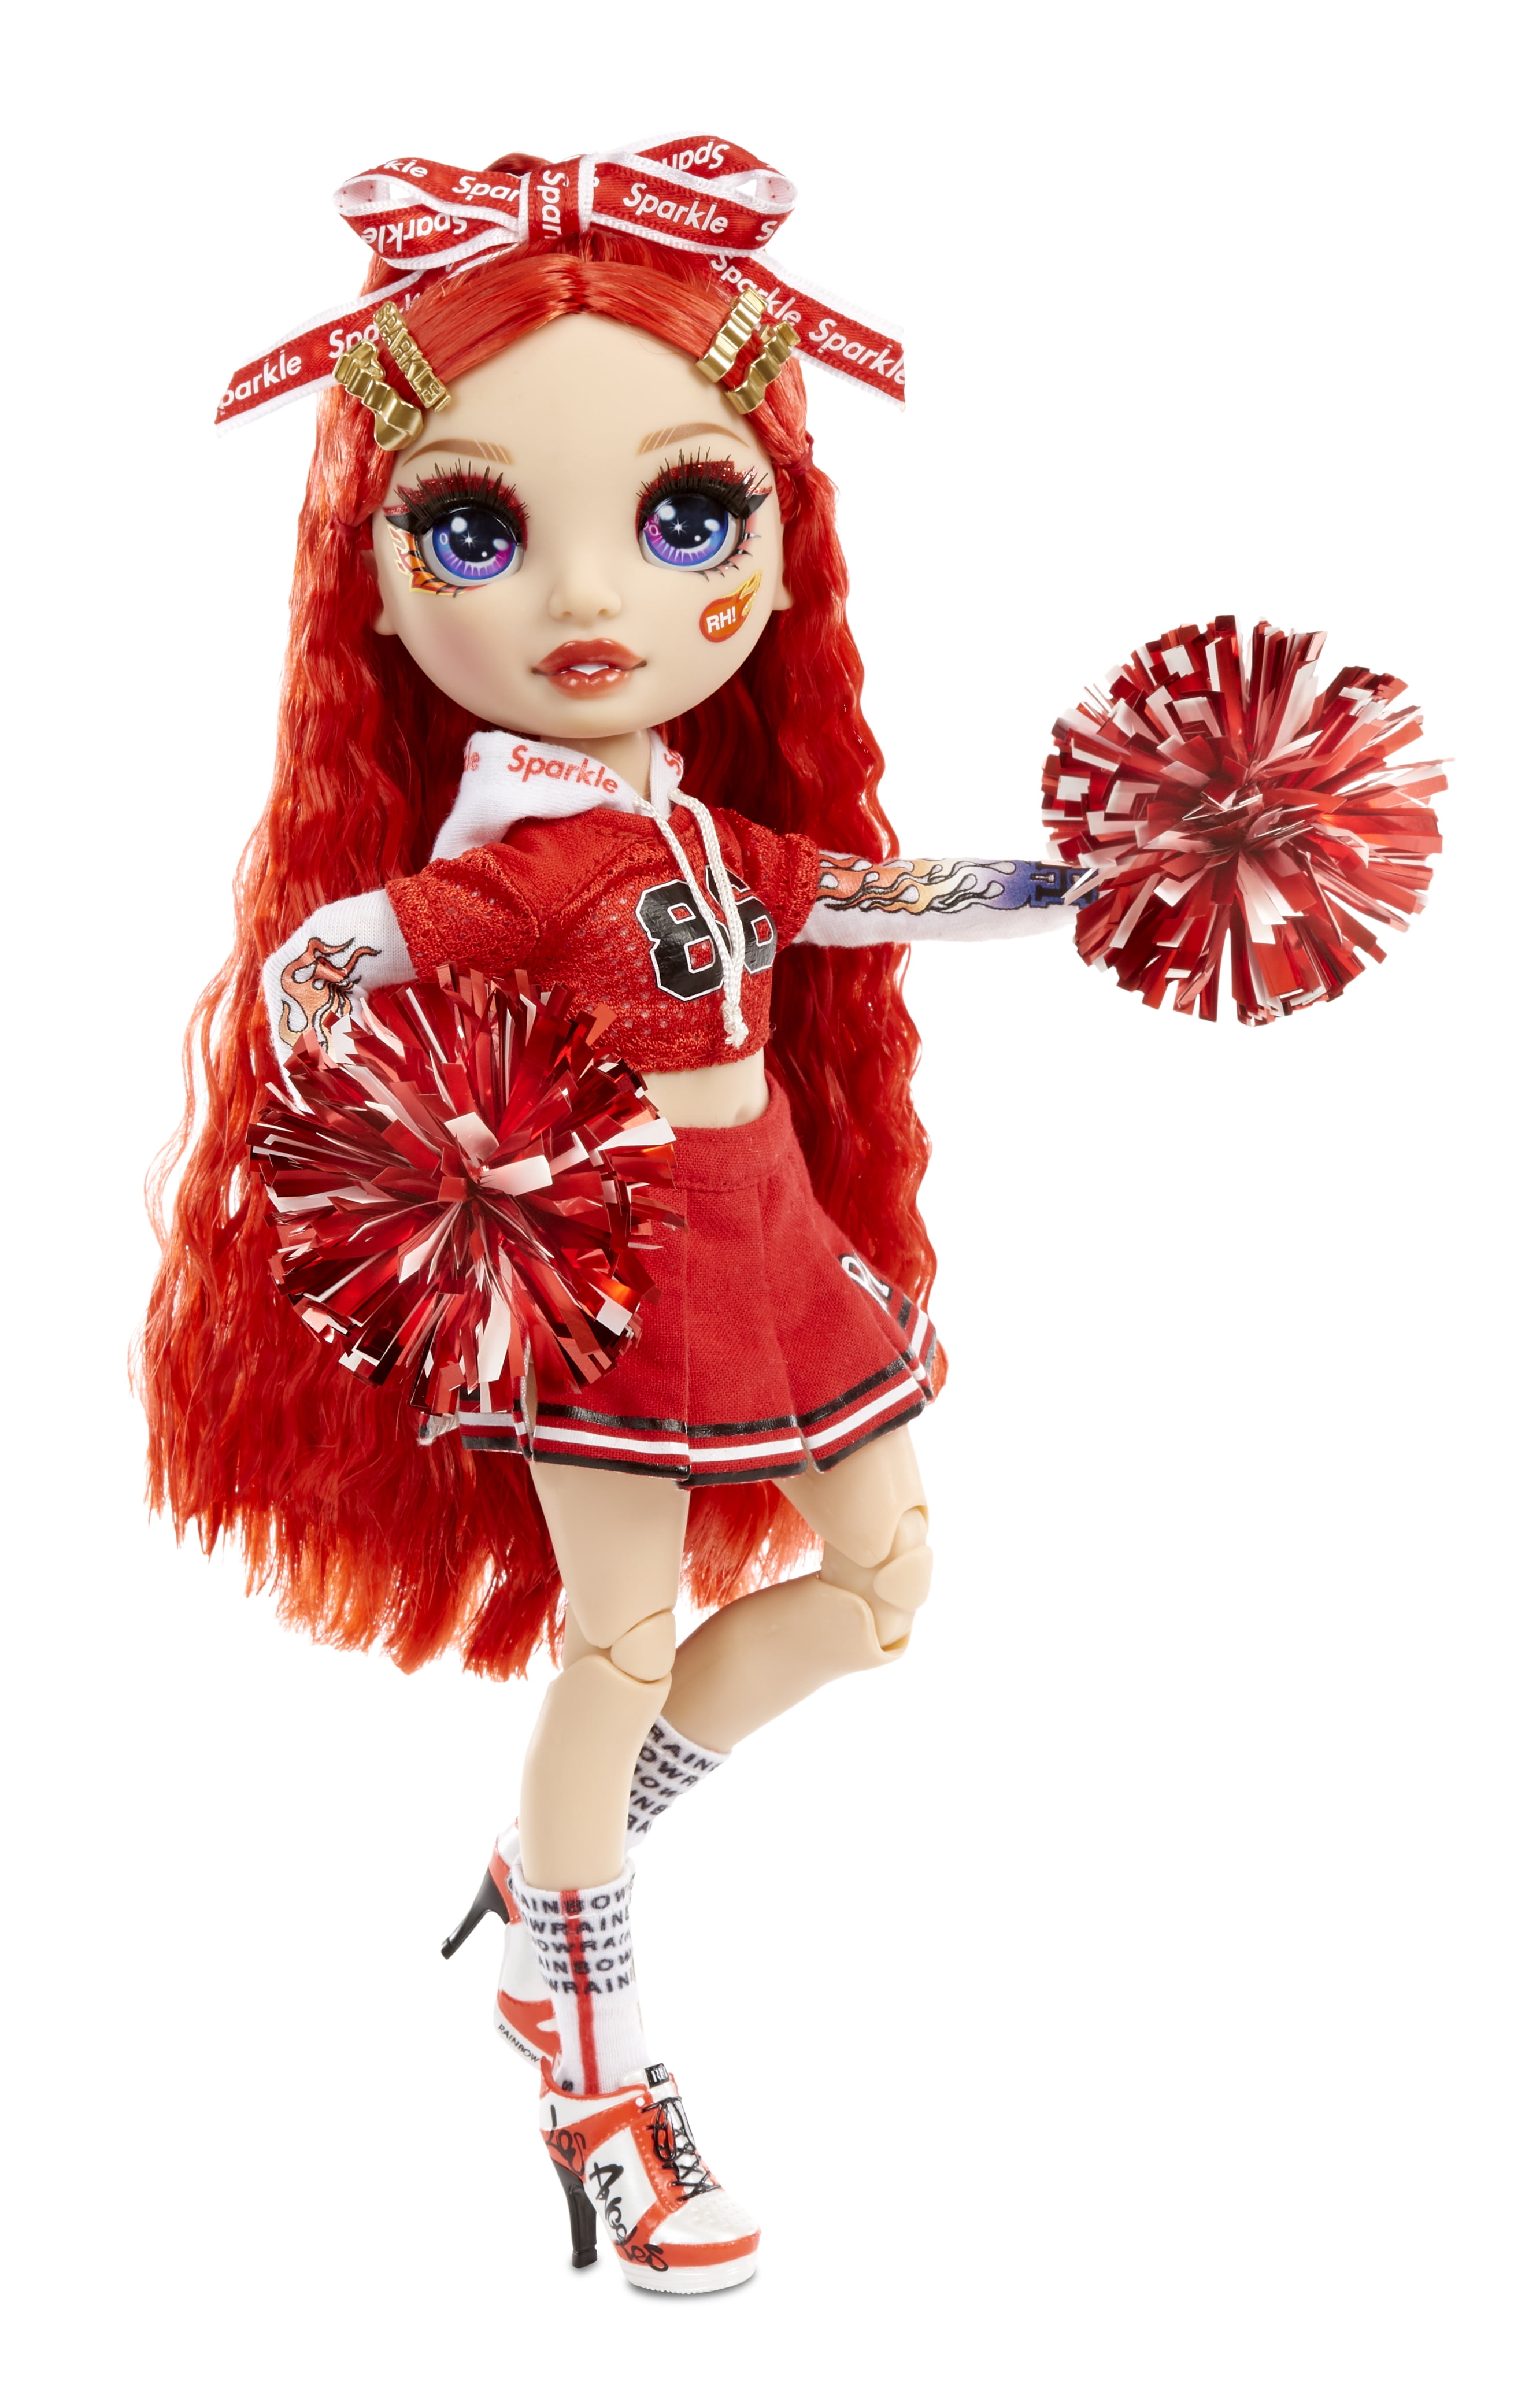 Rainbow High Cheer Ruby Anderson – Red Fashion Doll with Pom Poms,  Cheerleader Doll, Toys for Kids 6-12 Years Old